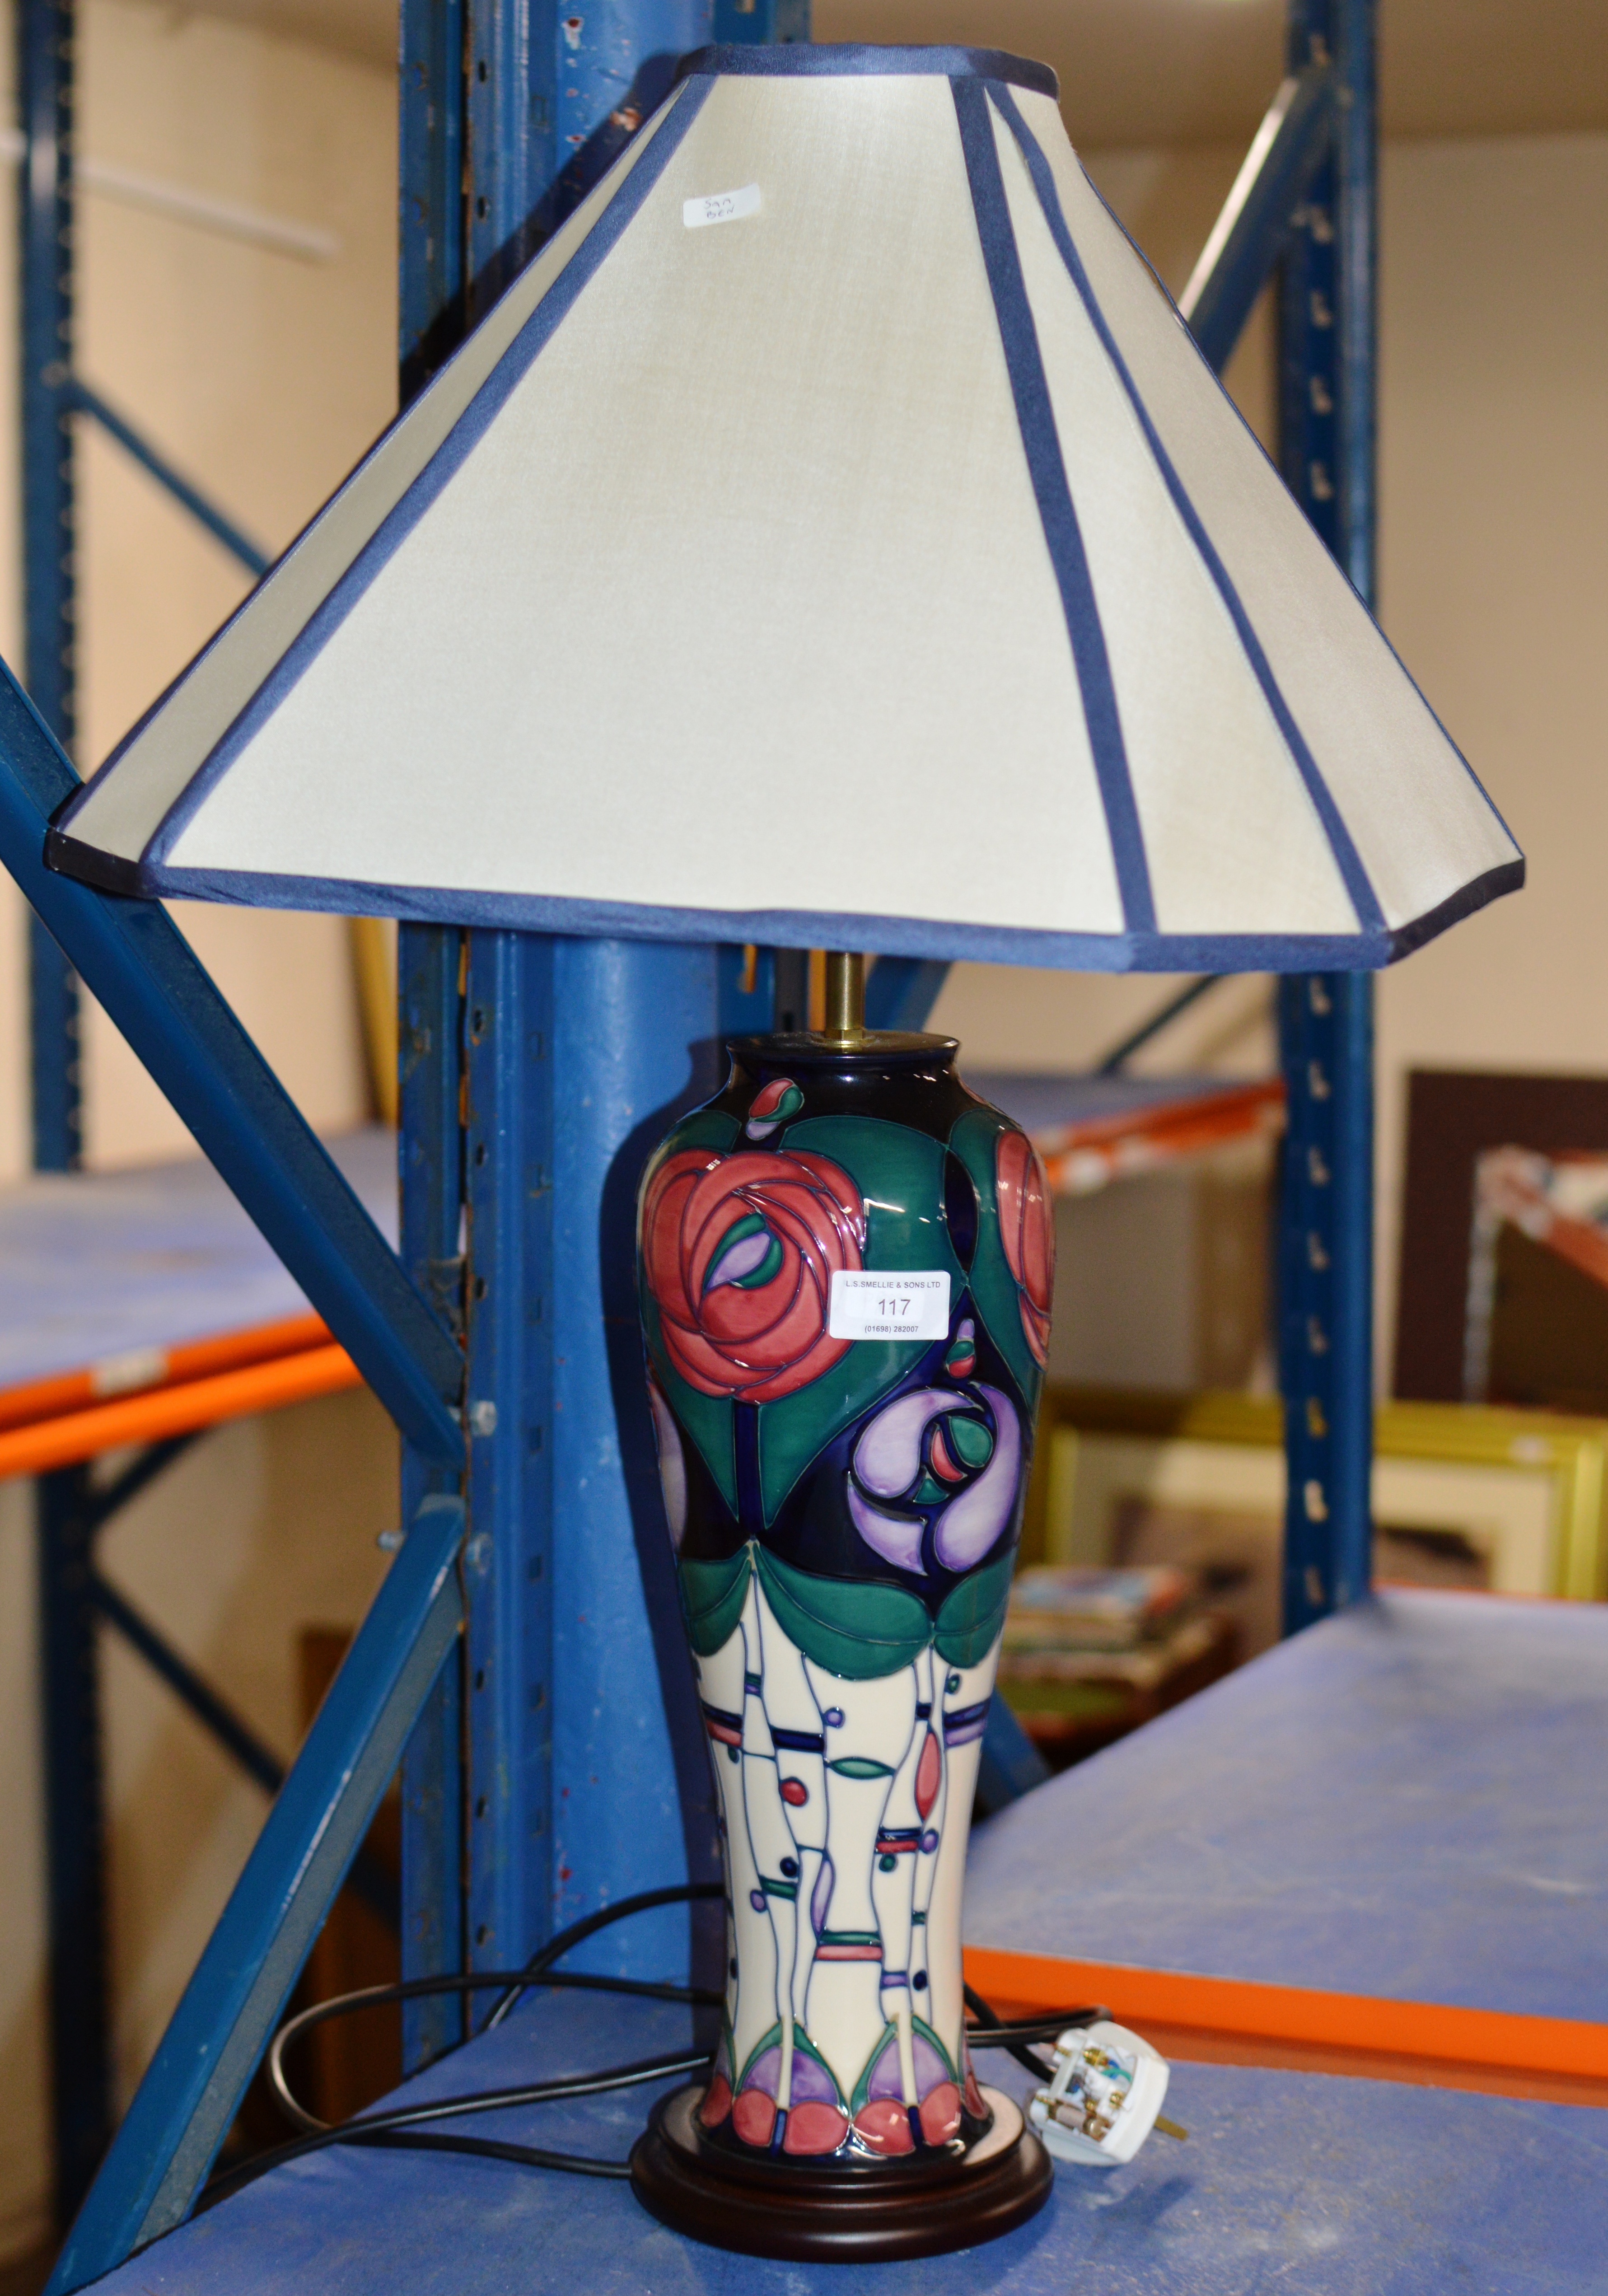 LARGE 15" MODERN MOORCROFT POTTERY TABLE LAMP WITH ORIGINAL SHADE